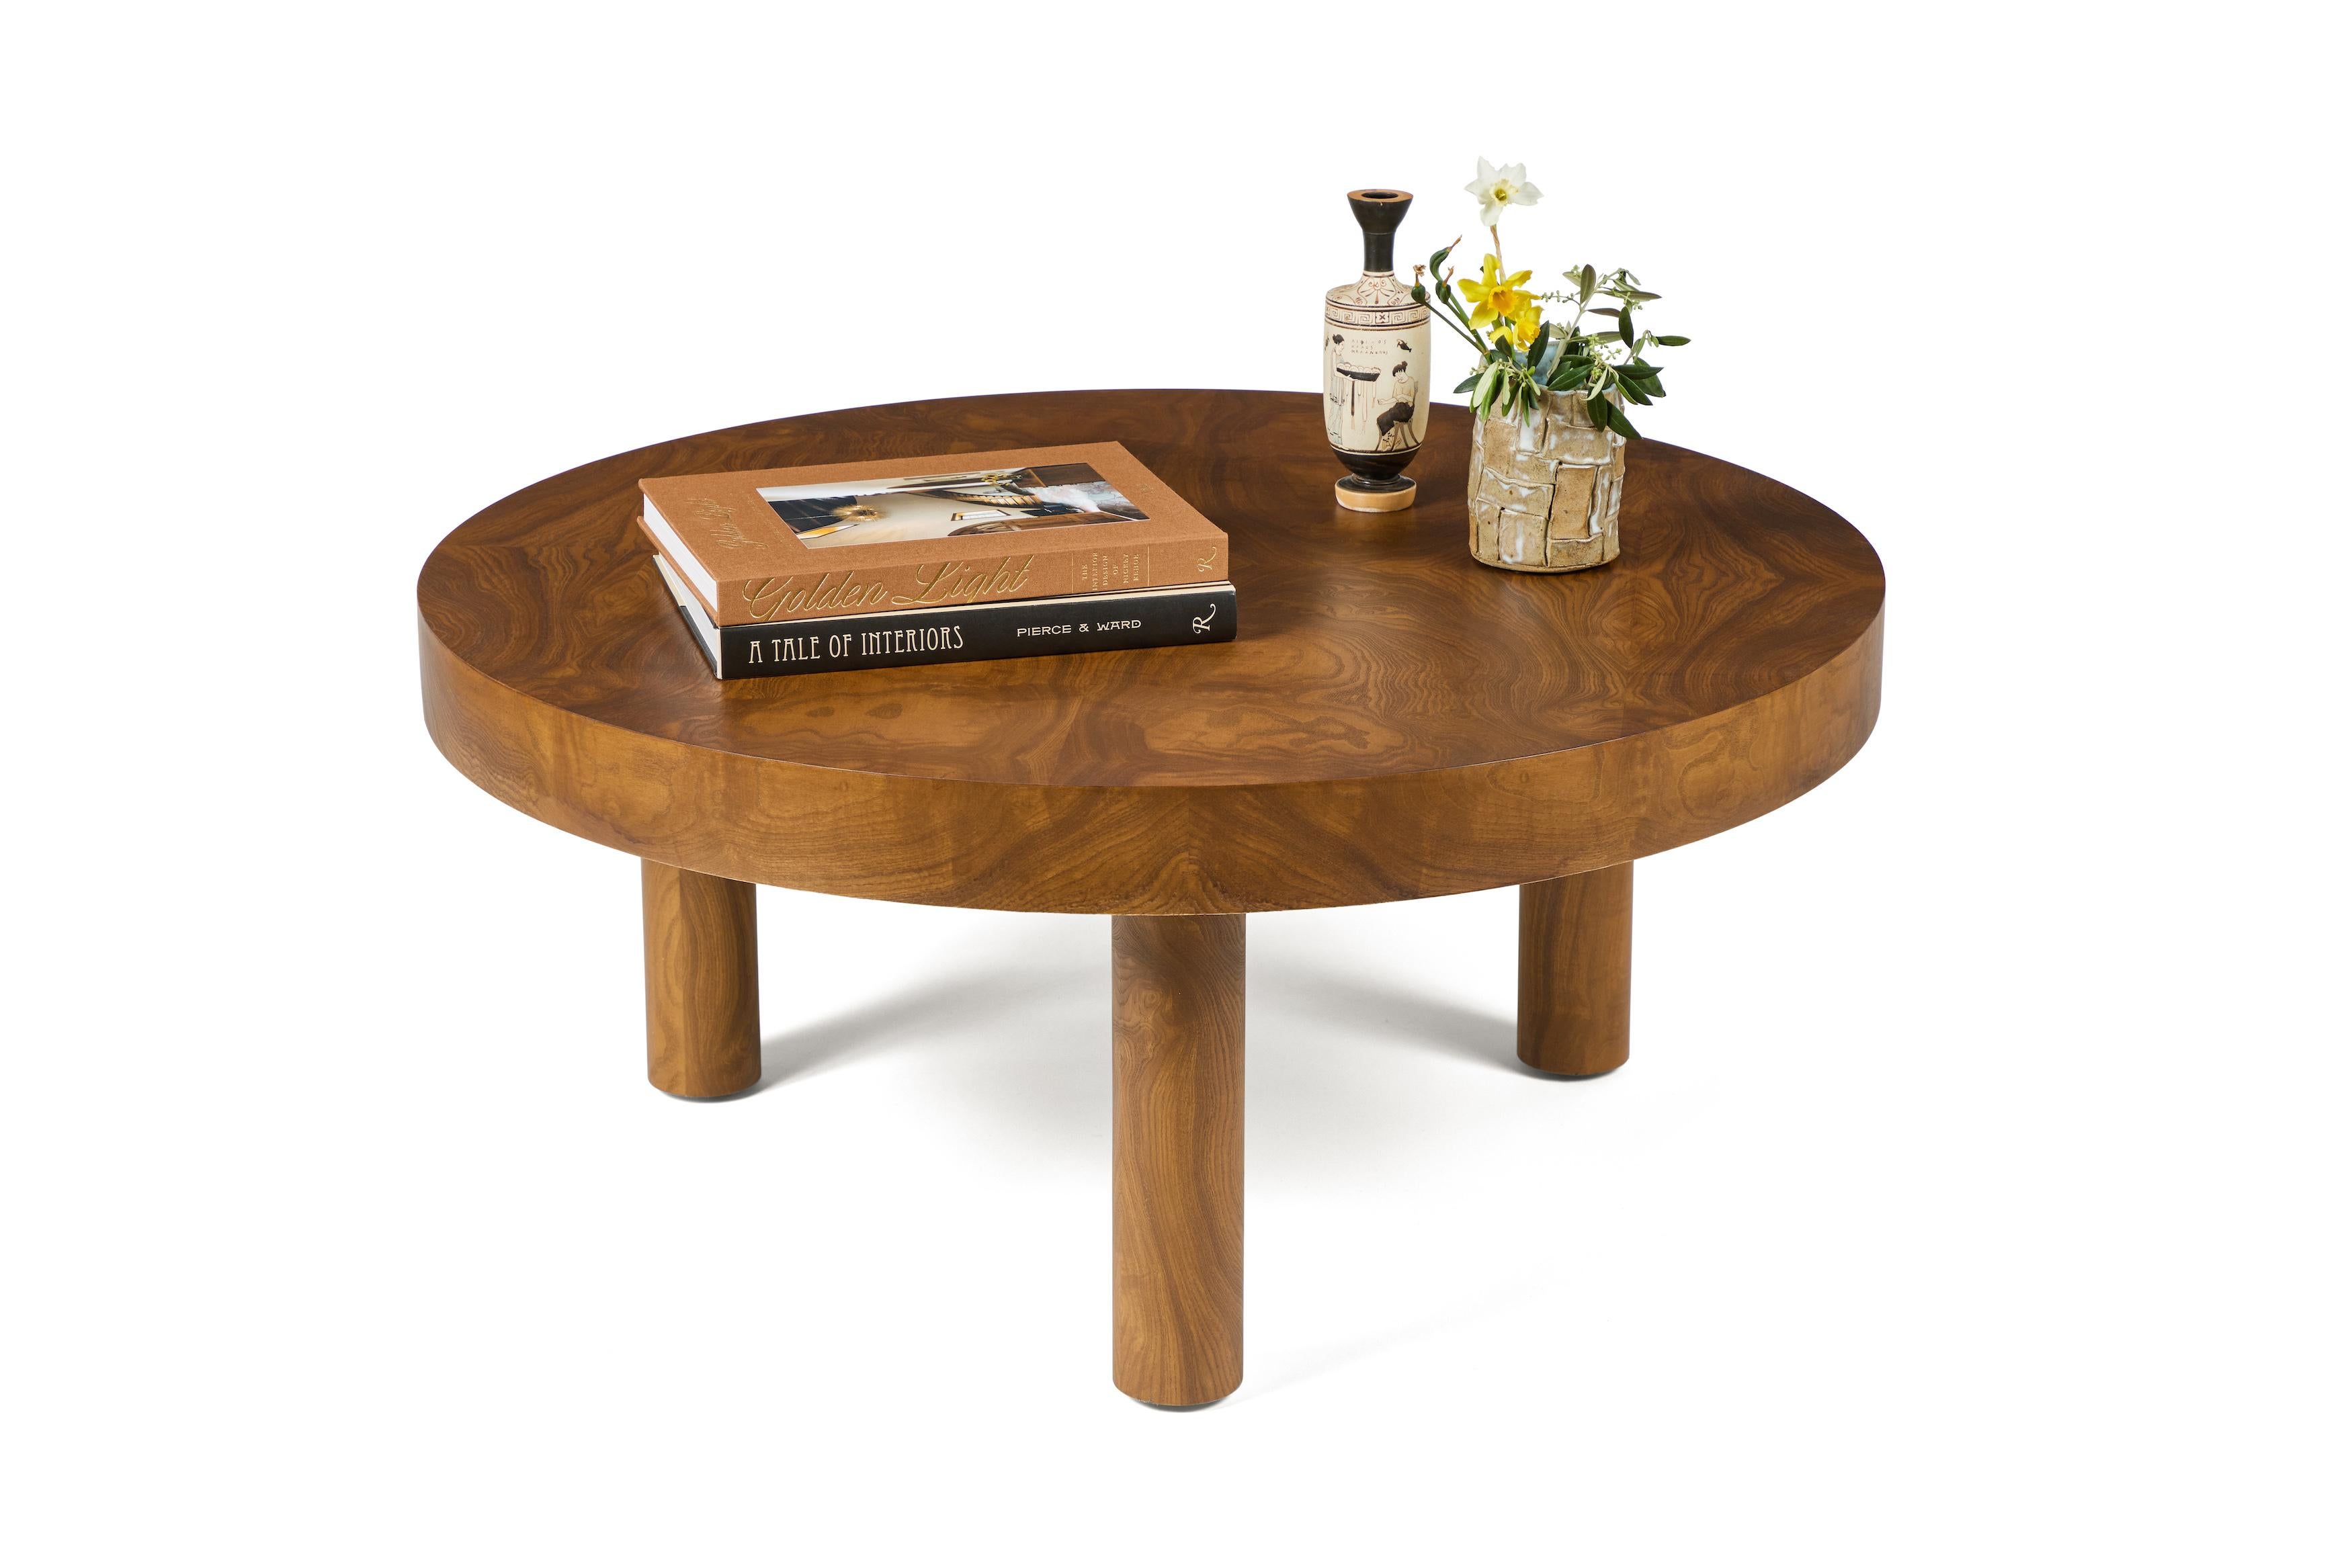 Figural woods and casual, clean lines combine in our Carlton Table, shown here in our Vintage Burl Wood finish. 

Dimensions: 16